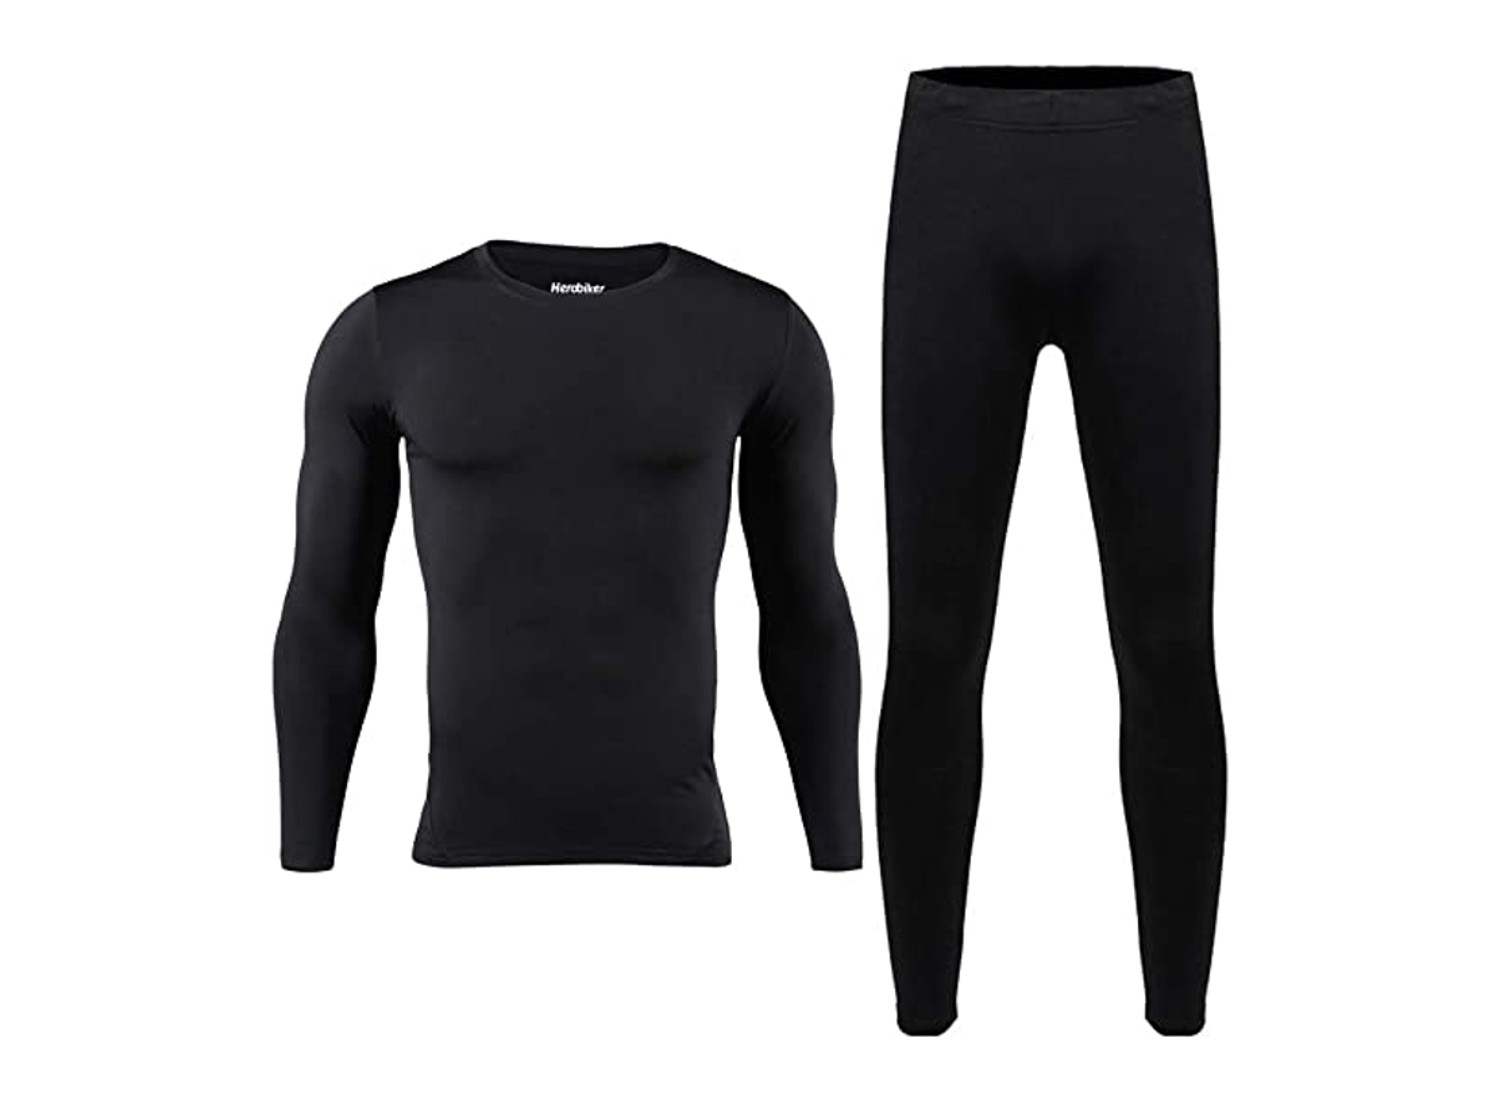 thermal underwear review